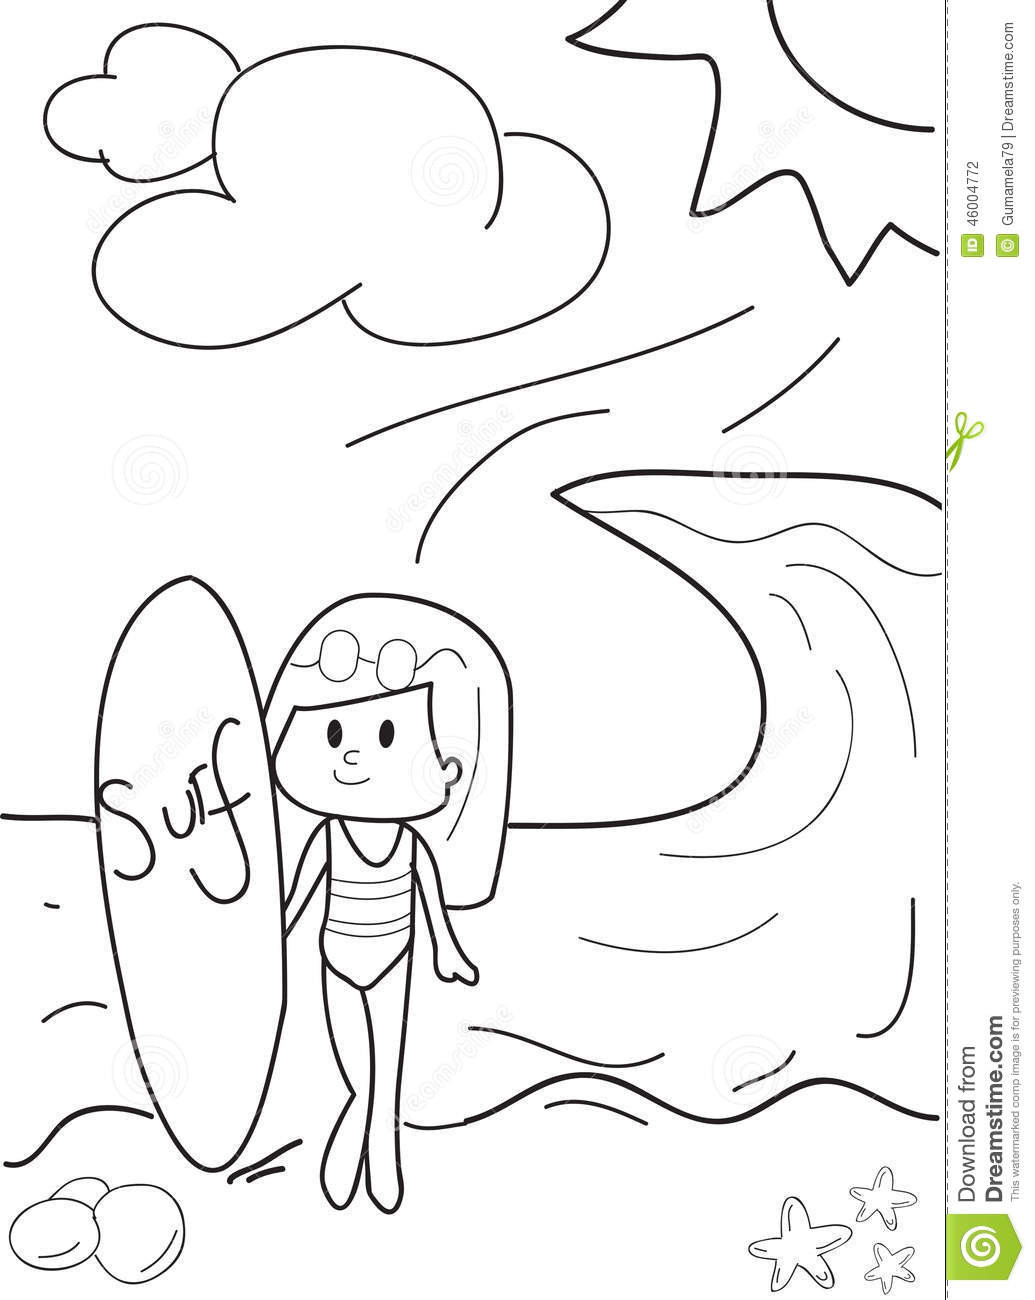 Girl Surfing Coloring Pages
 Hand Drawn Beach Girl Surfing Coloring Page Stock